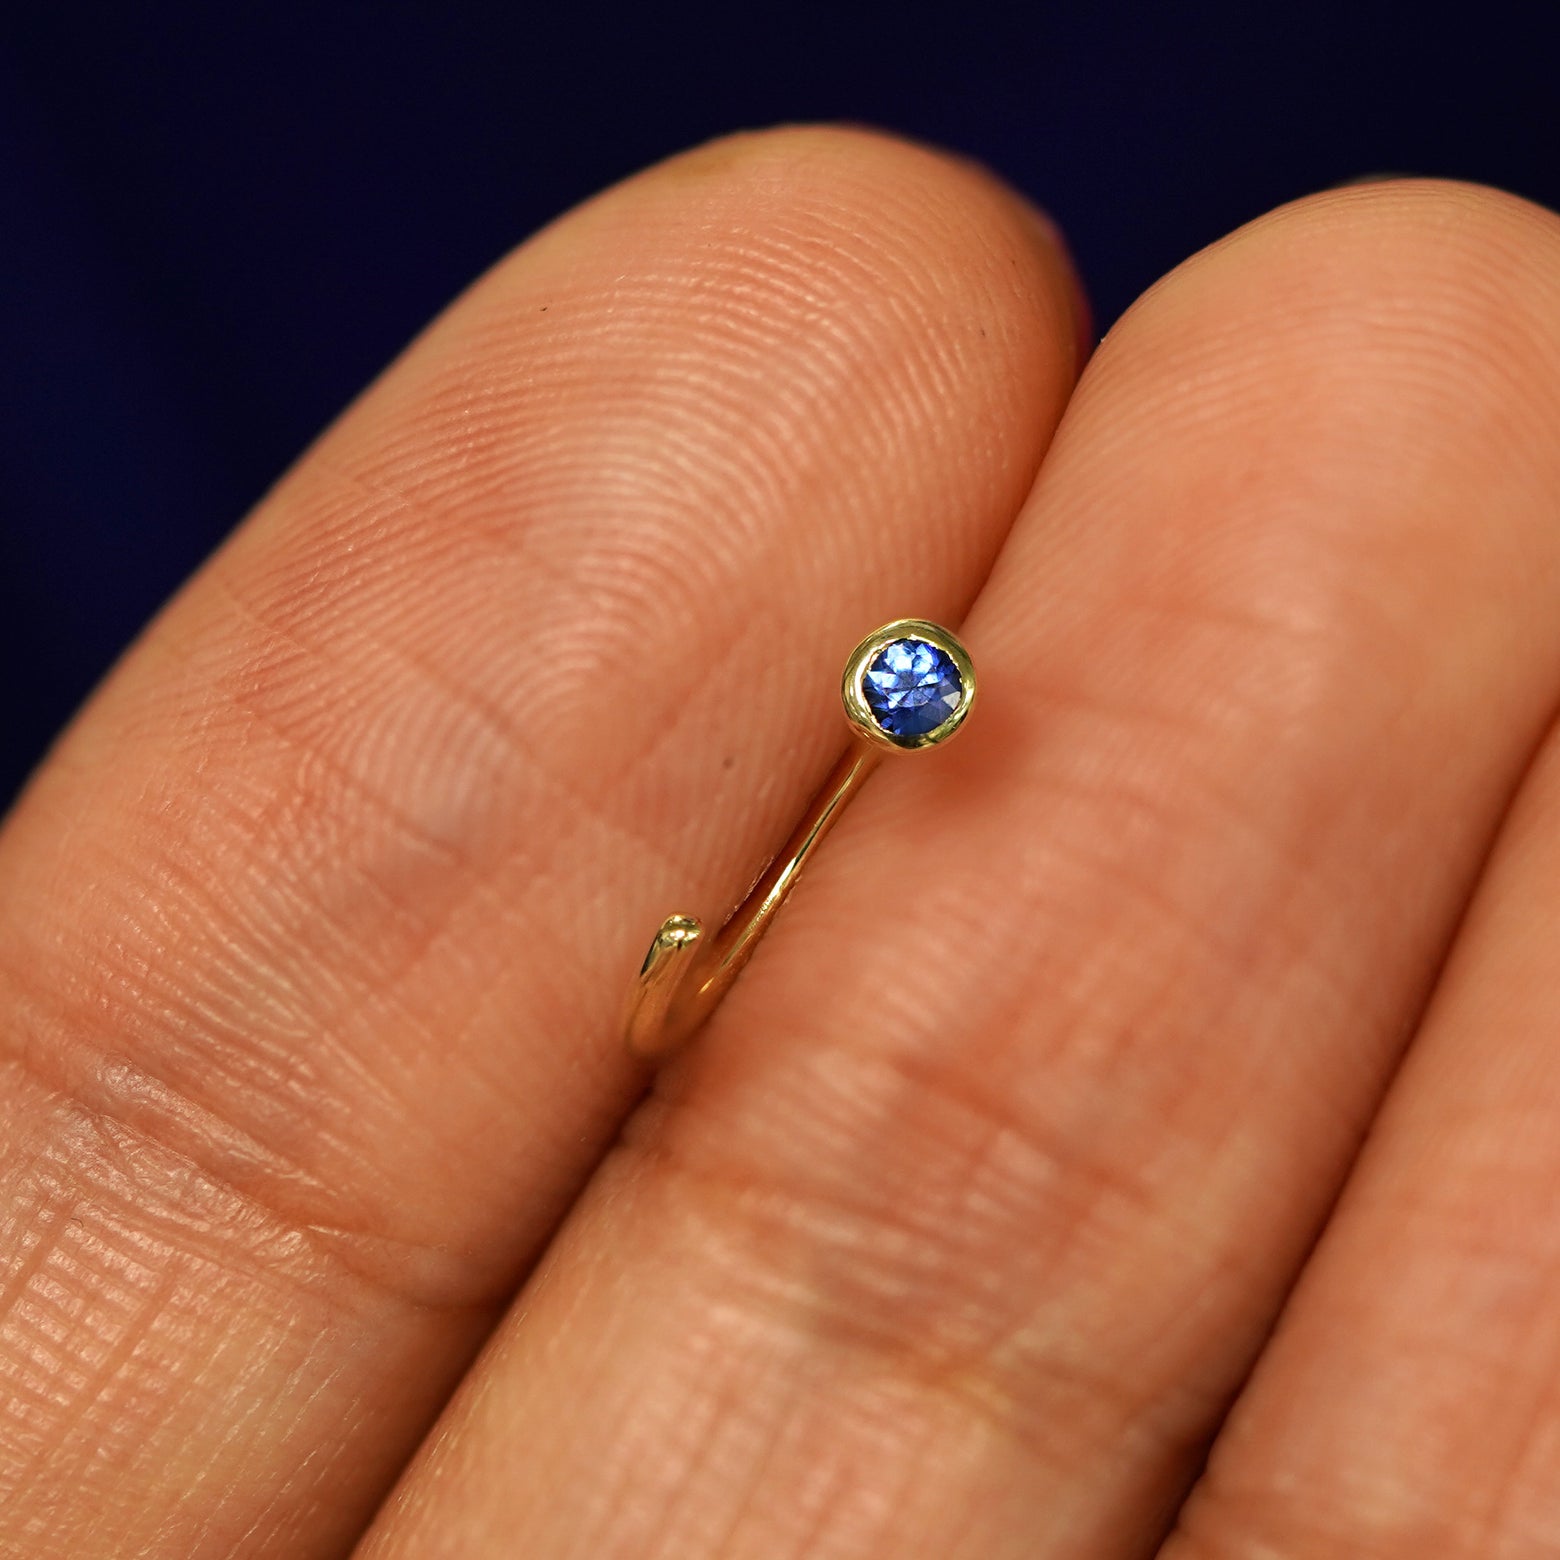 A Sapphire Open Hoop between a models fingers to show the detail of the bezel set stone